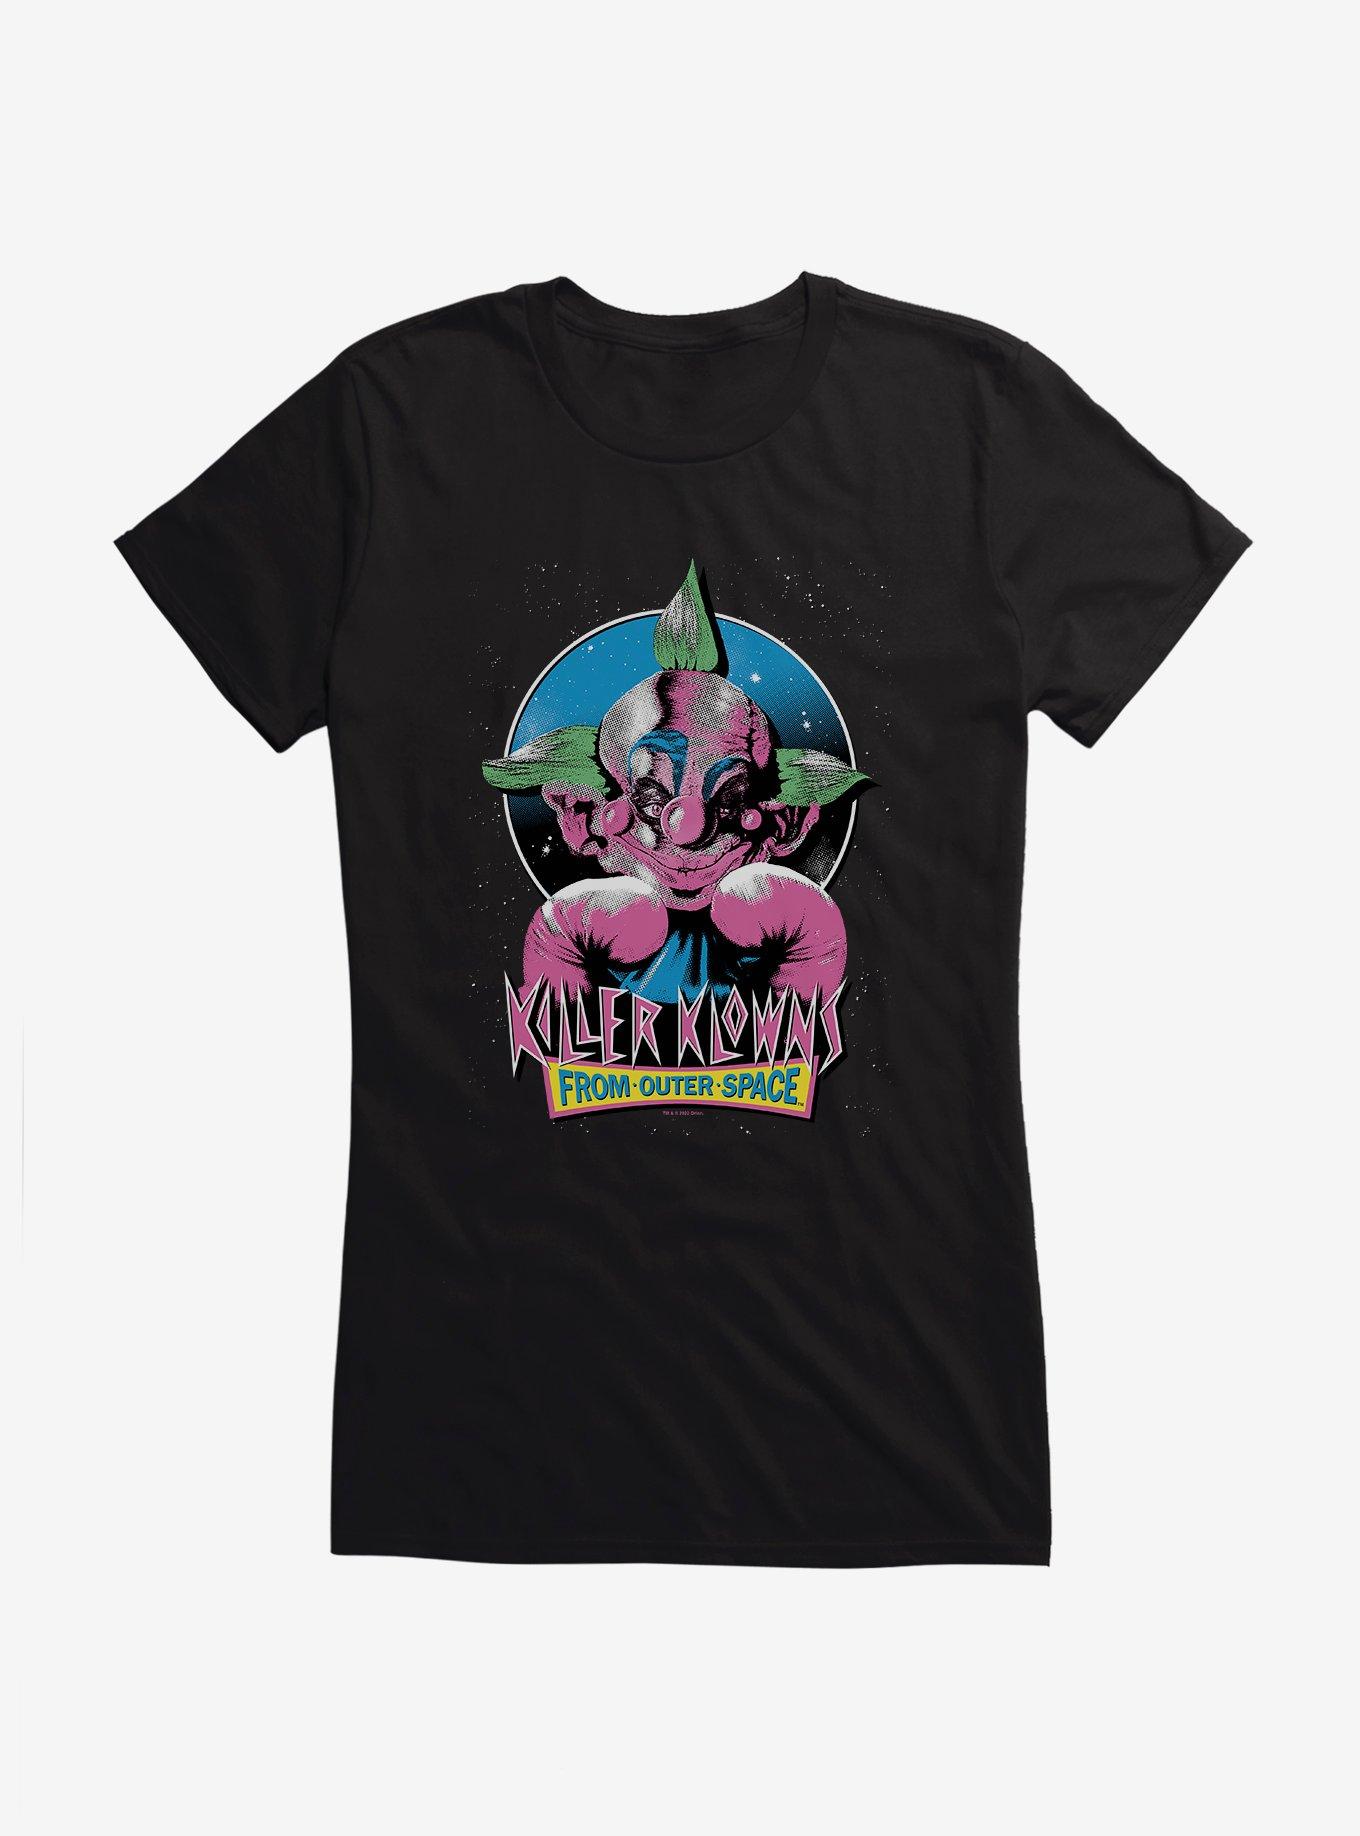 Killer Klowns From Outer Space Shorty Girls T-Shirt